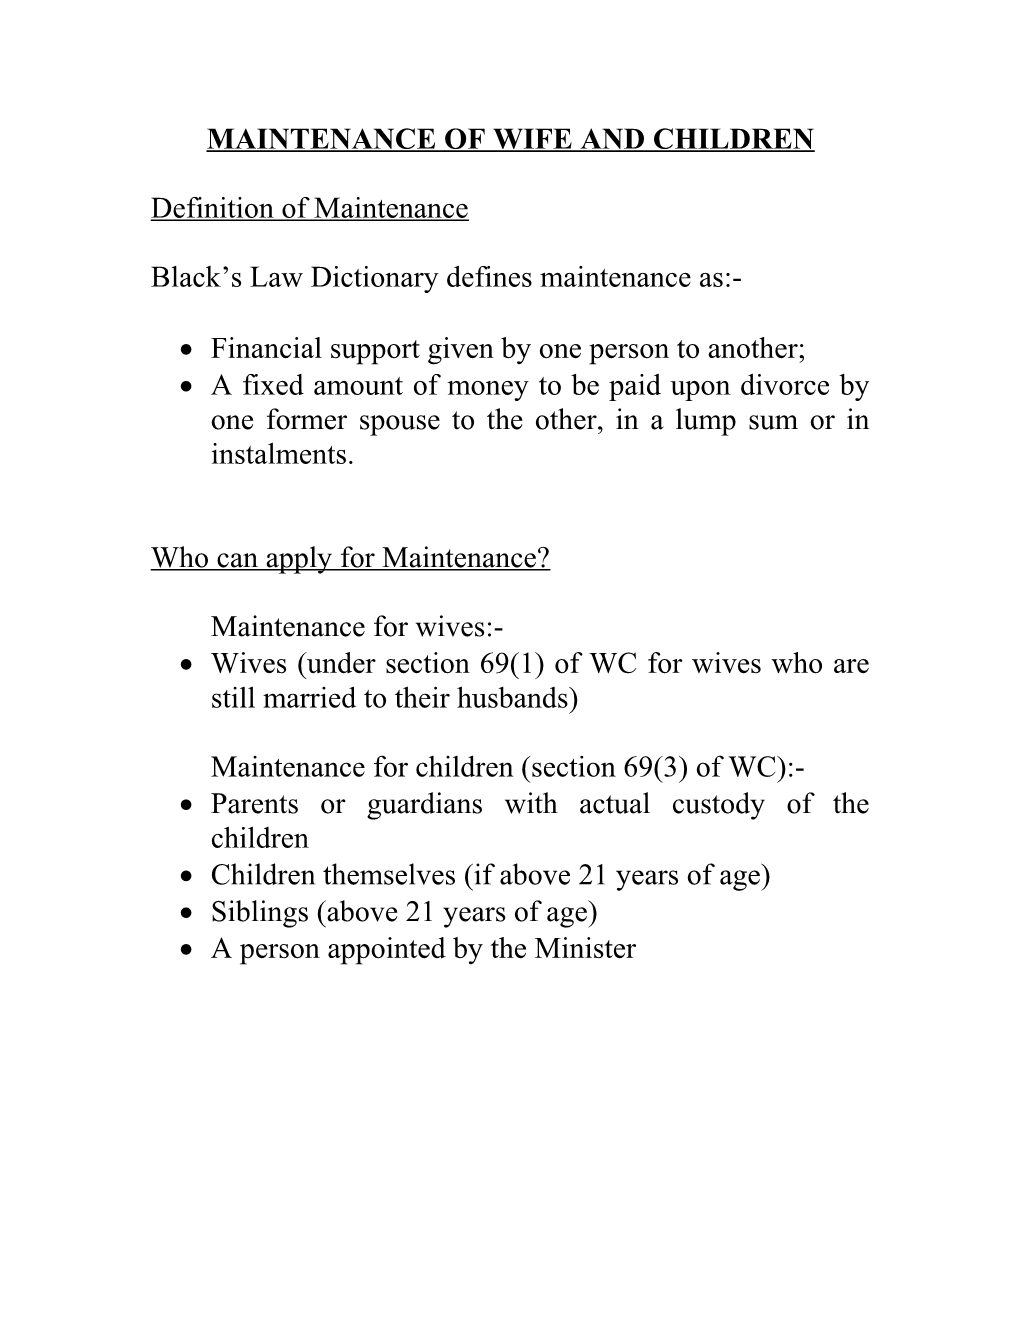 Maintenance of Wife and Children